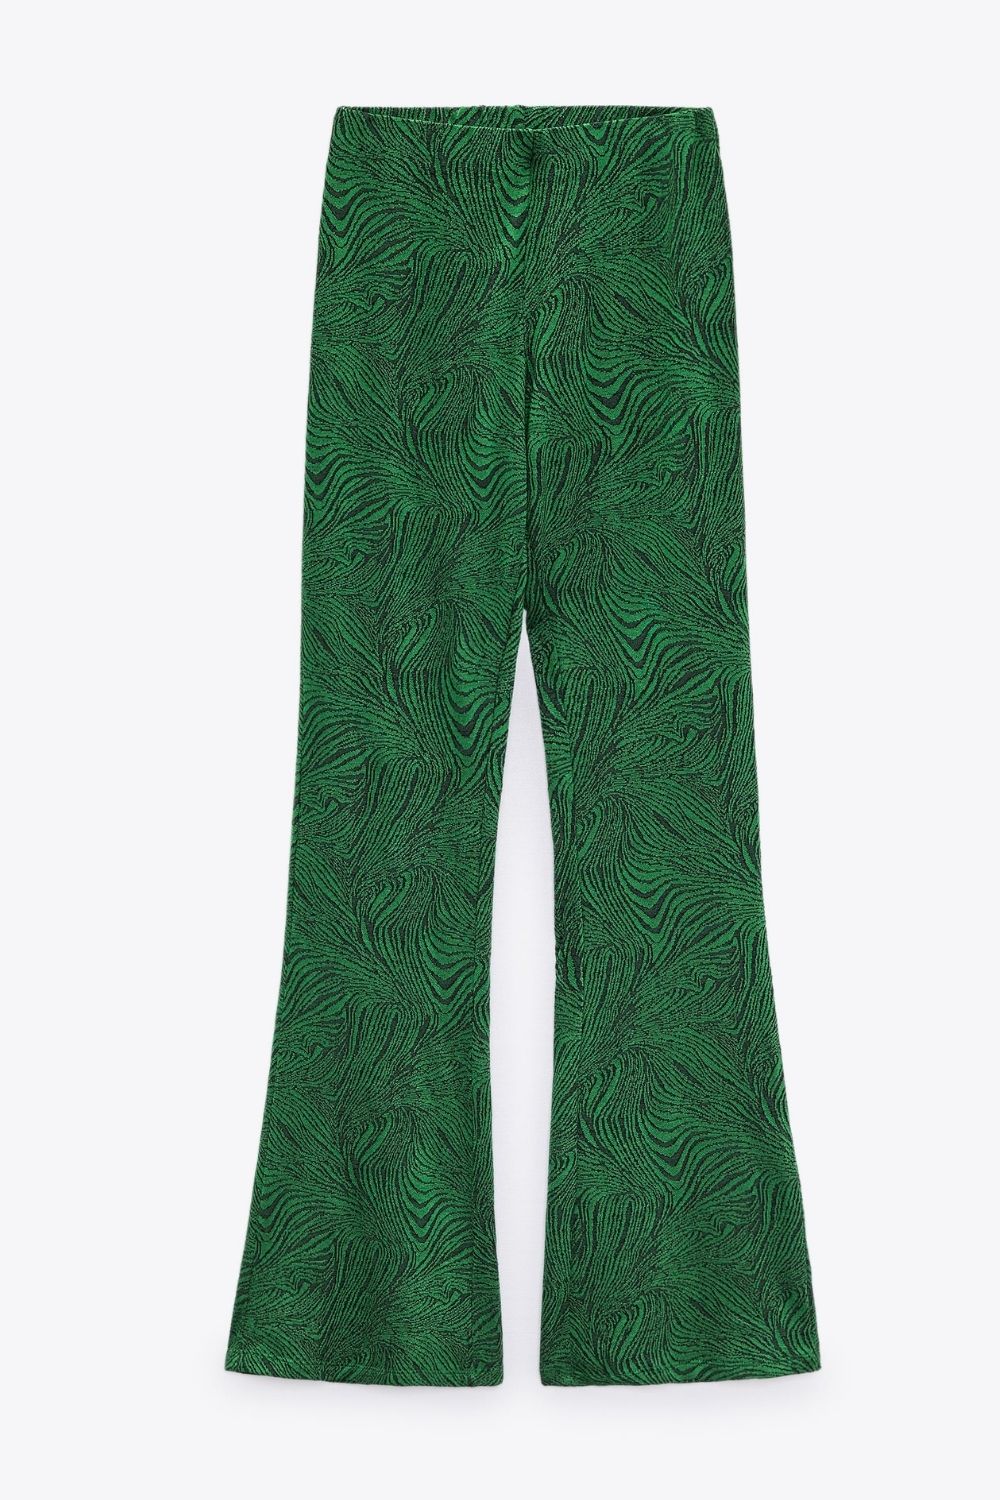 These 1970s-Inspired Trousers Scream Summer - The Gloss Magazine